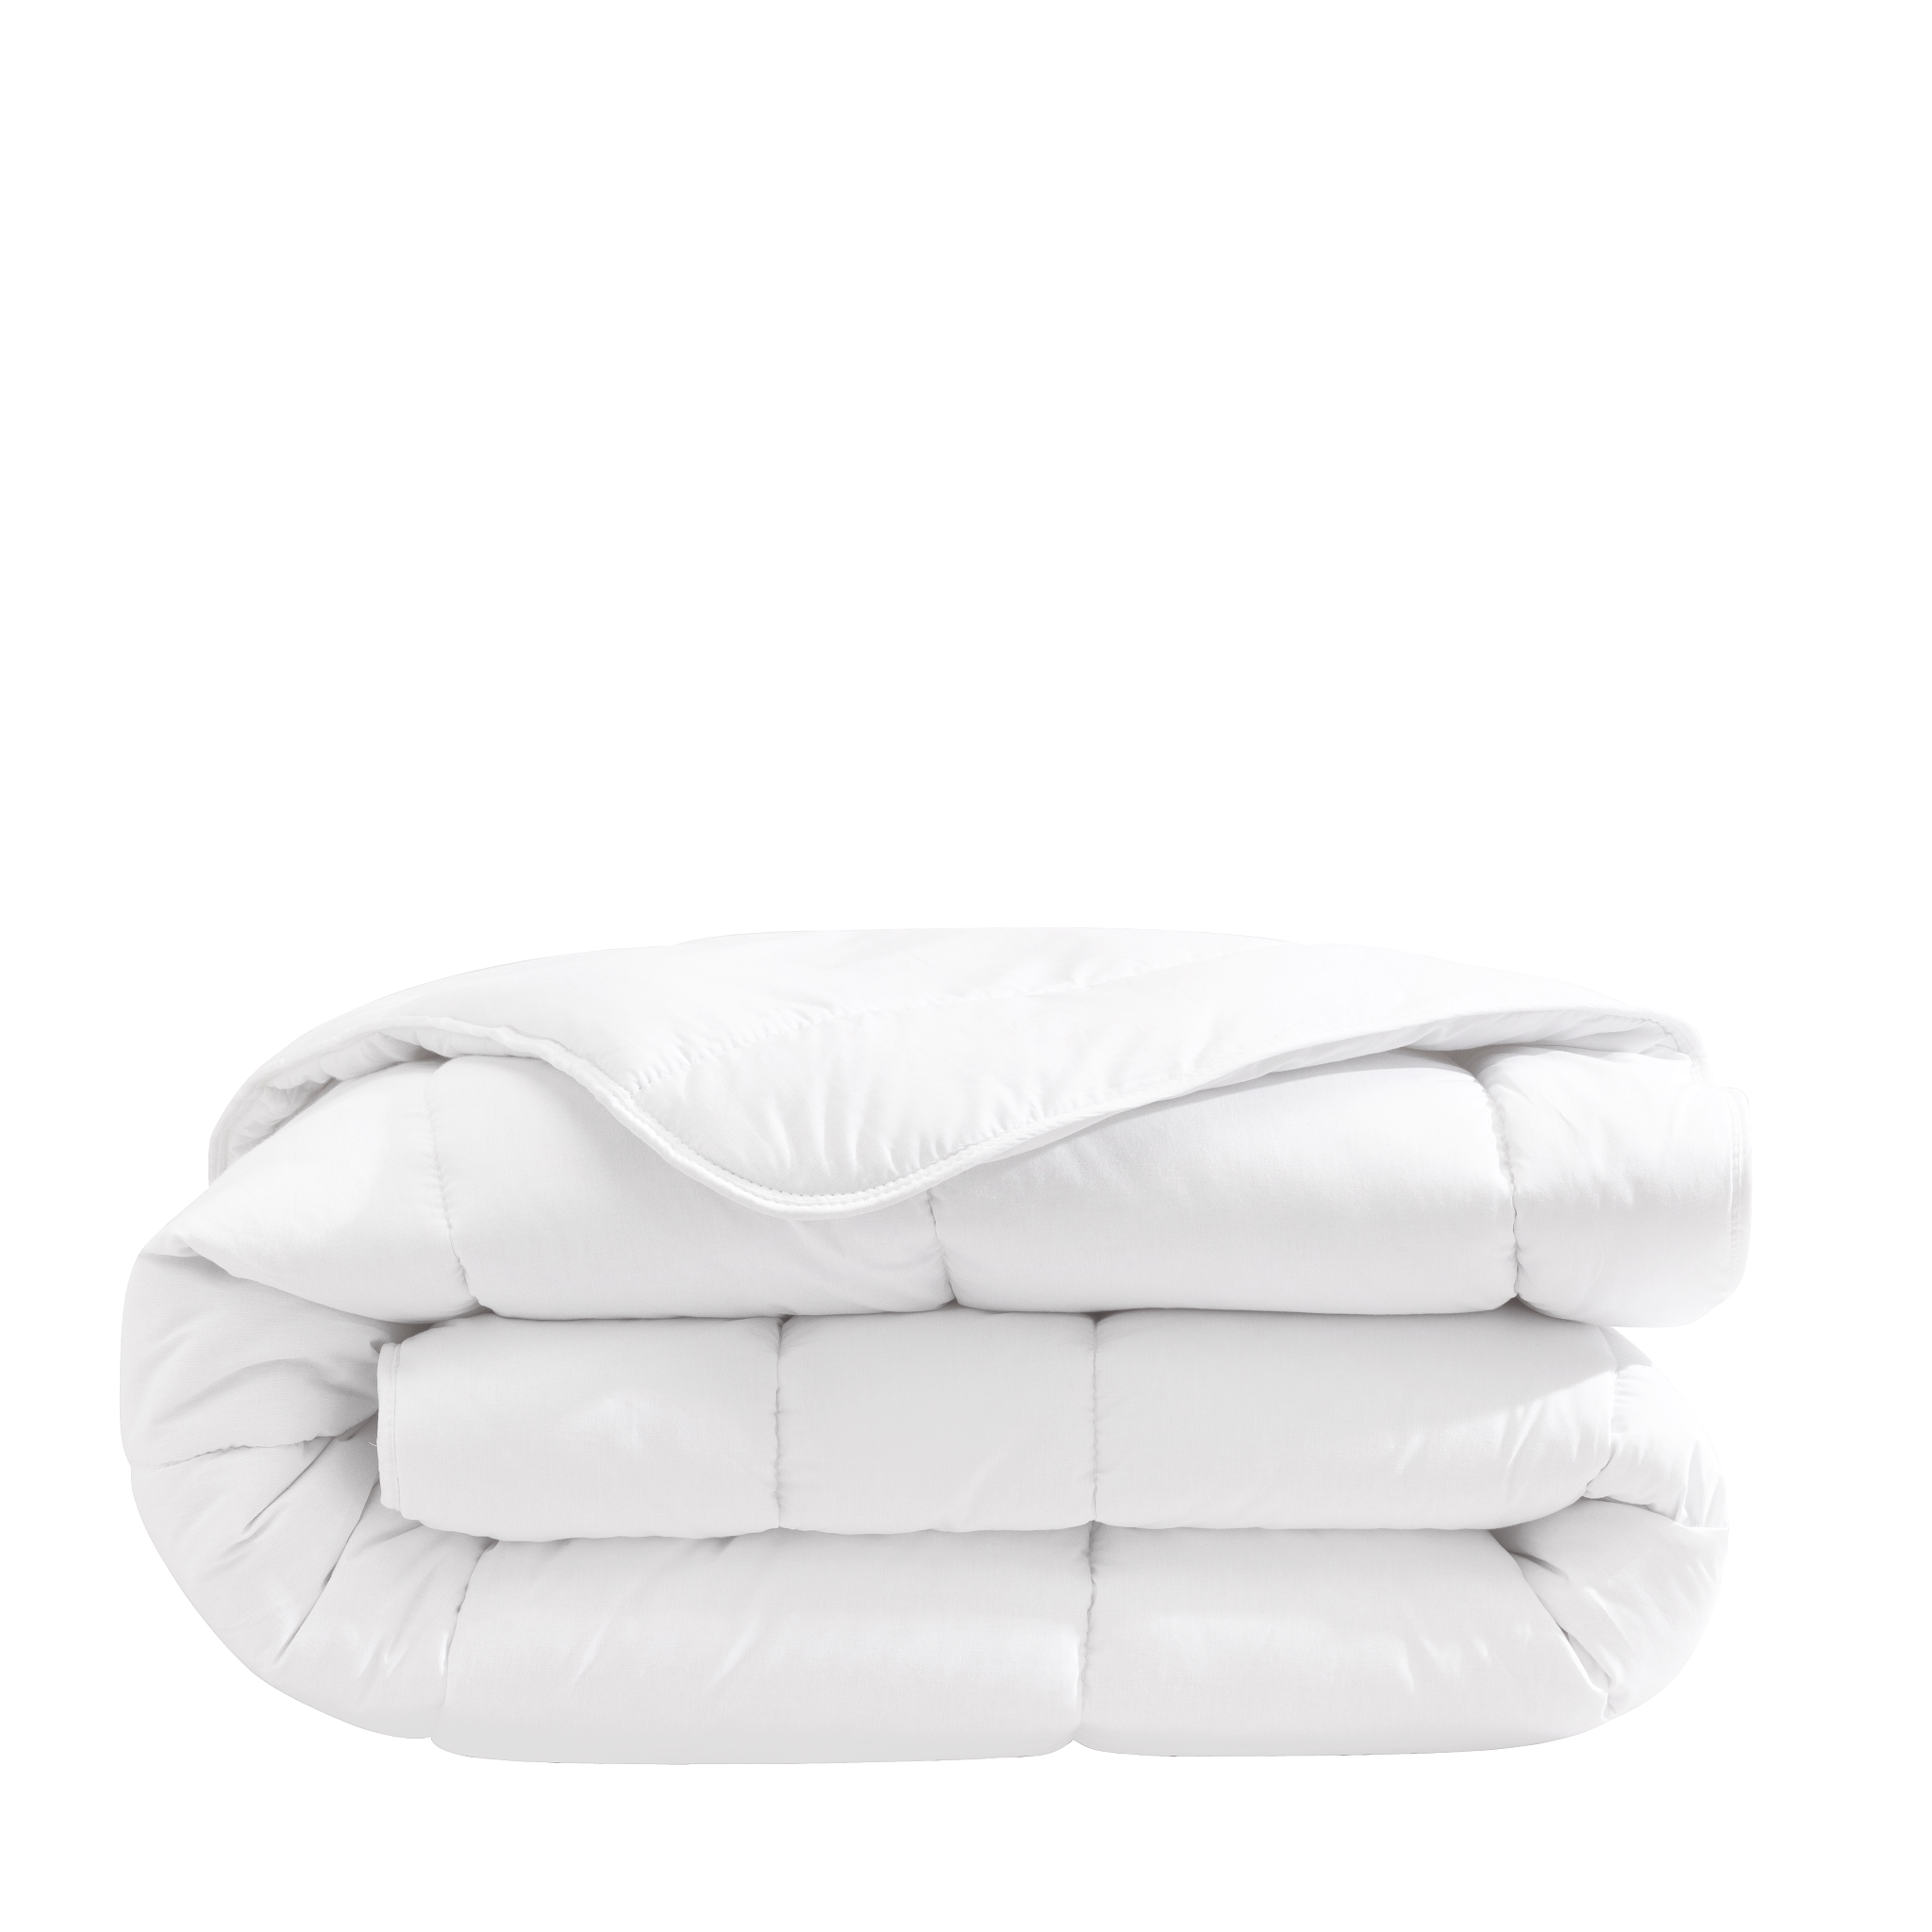 Couette hiver 550g someo 200x200 Couleur blanc Someo